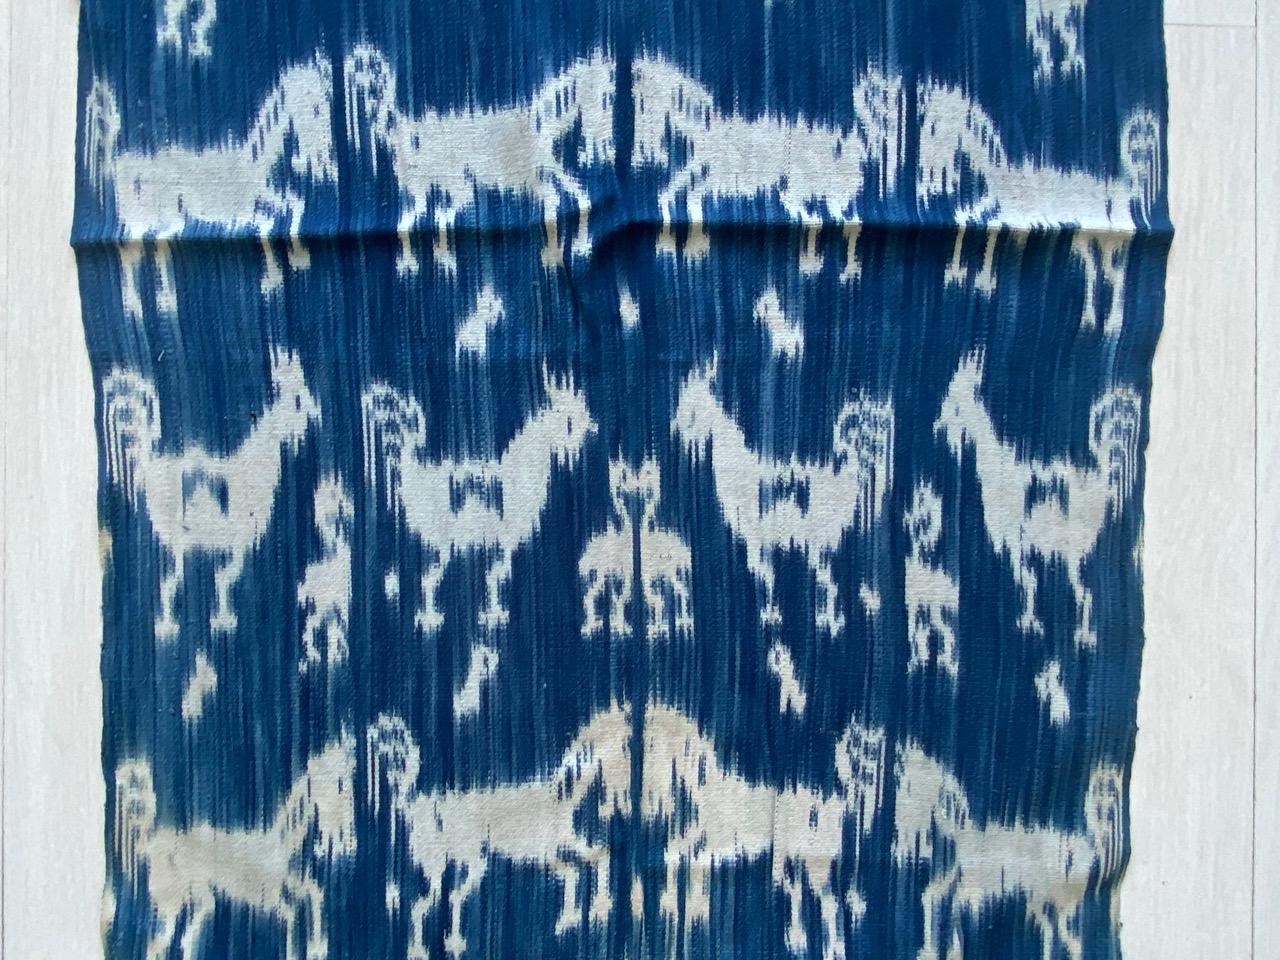 Antique indigo and white textile from Sumba. The perfect size to wear as a shawl. Mythical characters, horses and birds intermingle in this graphic textile. Ikat is an ancient technique which is used to add patterns to textiles. The designs are